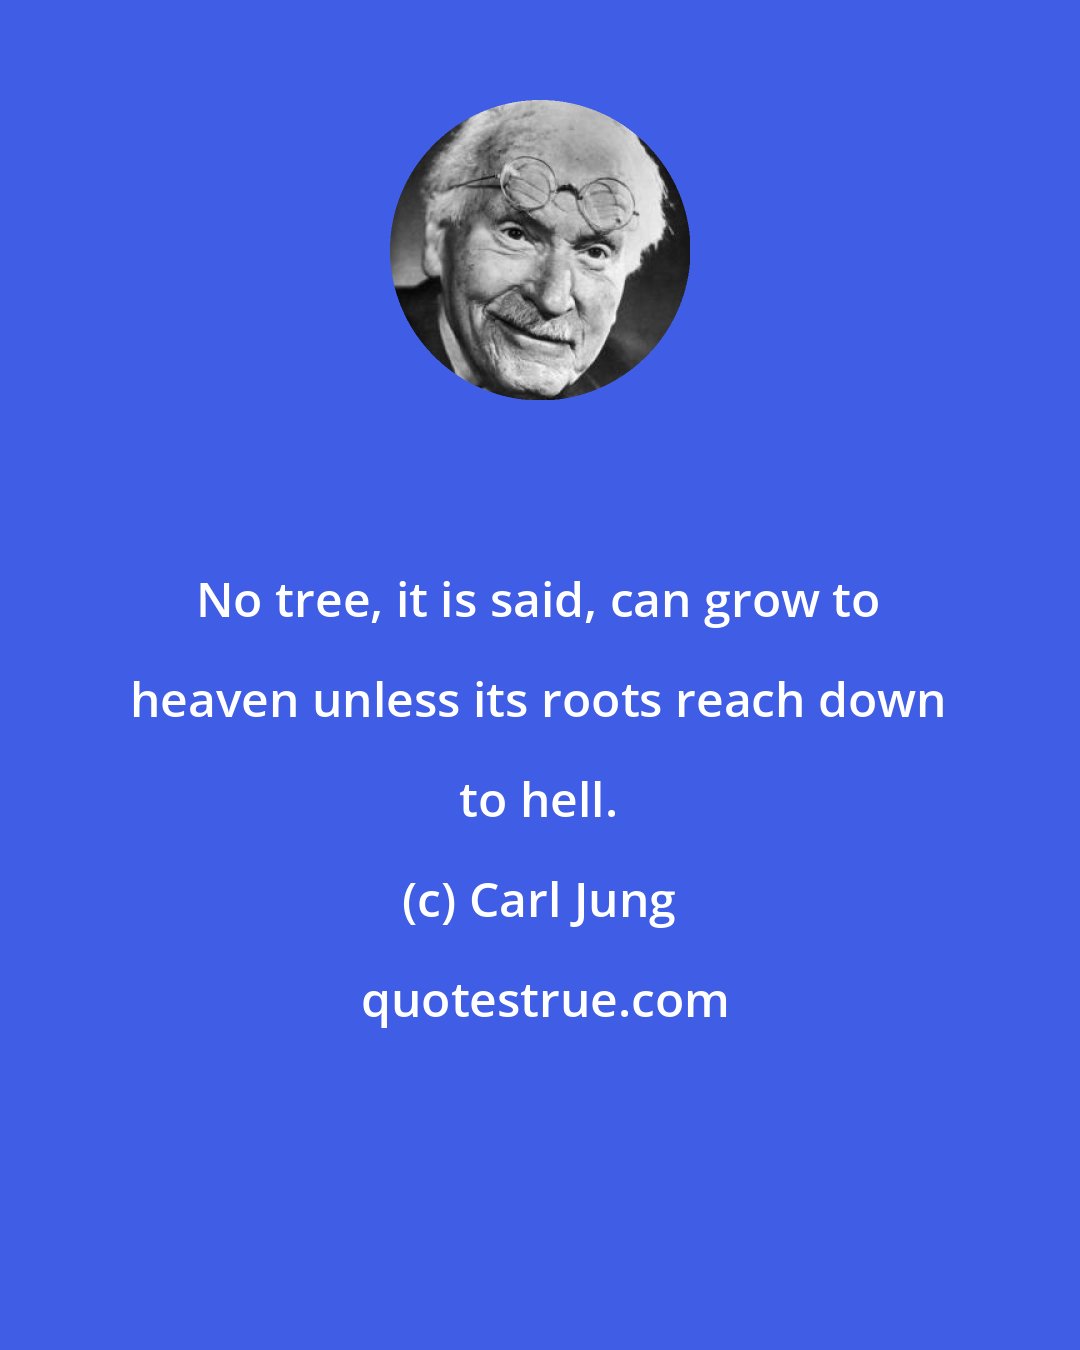 Carl Jung: No tree, it is said, can grow to heaven unless its roots reach down to hell.